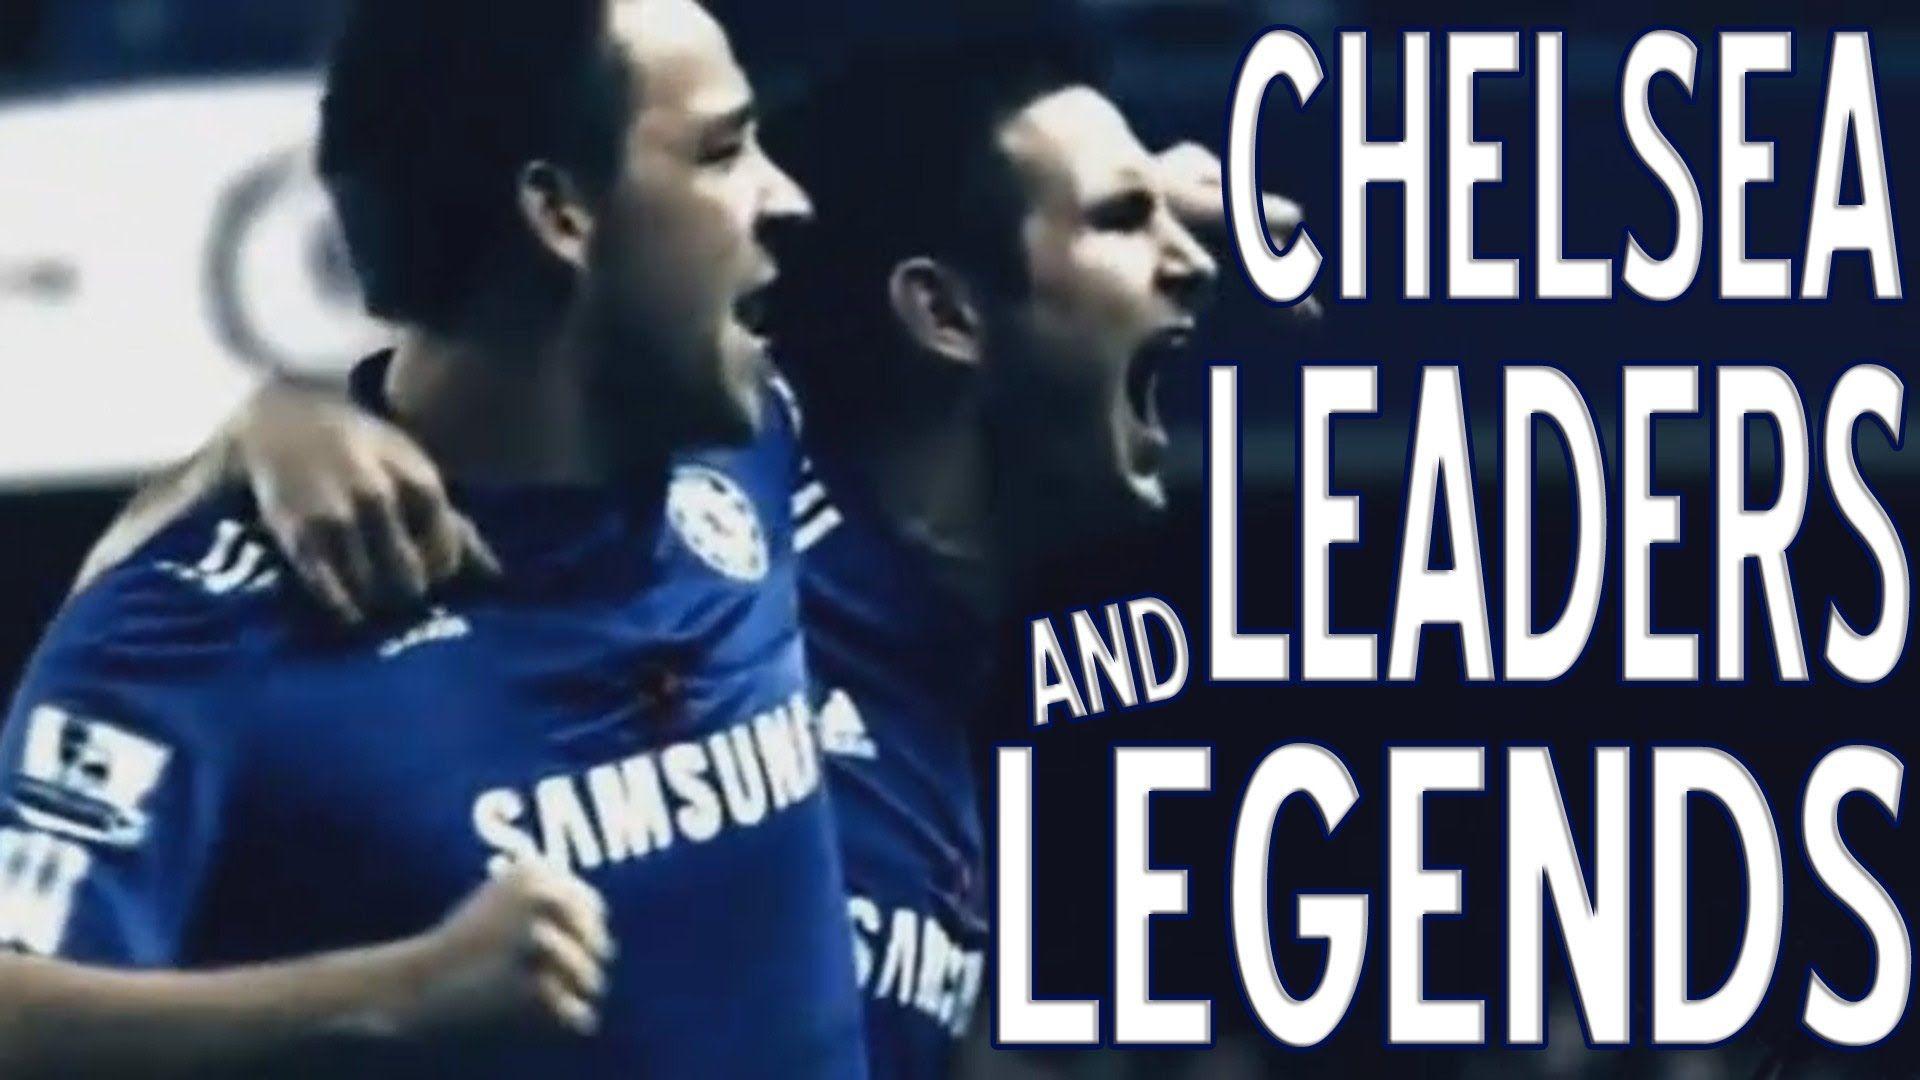 Chelsea Leaders and Legends